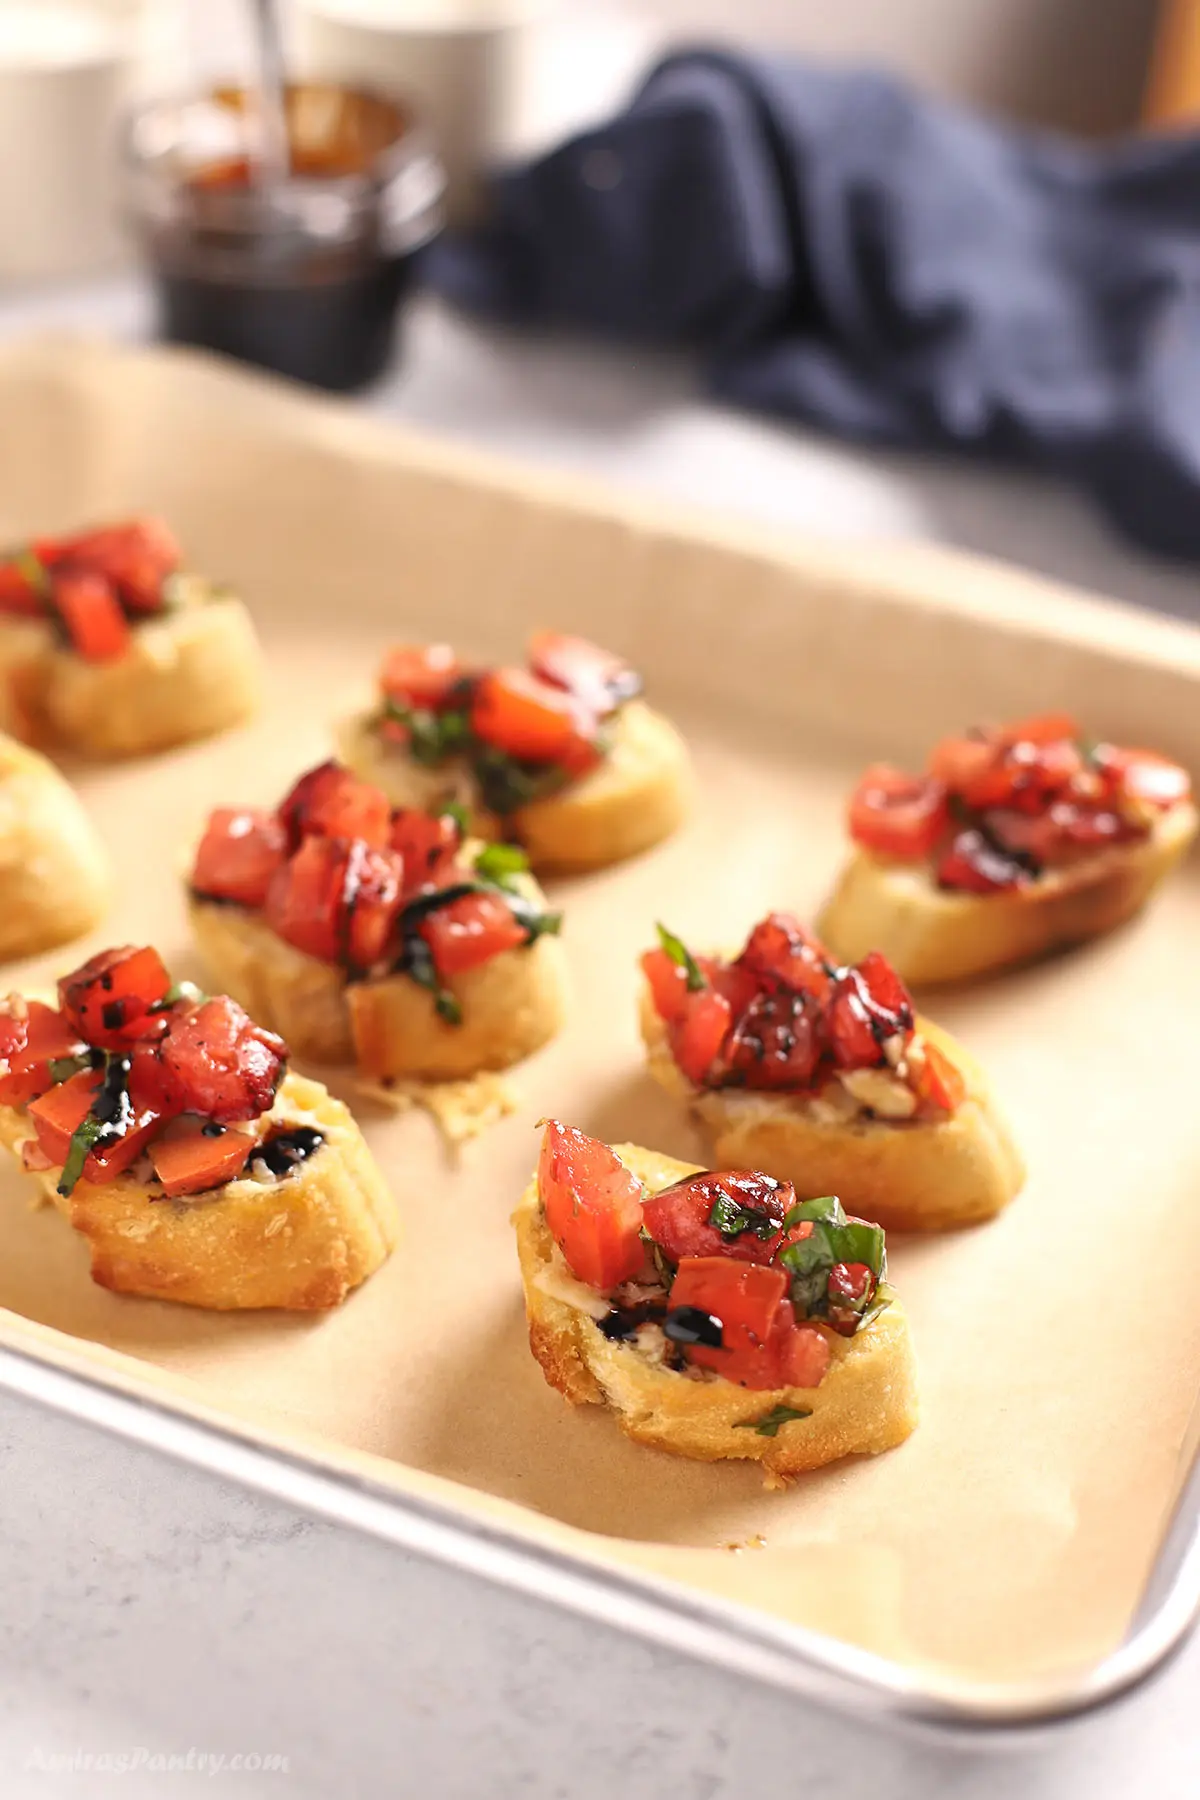 Slices of french bread topped with bruschetta.